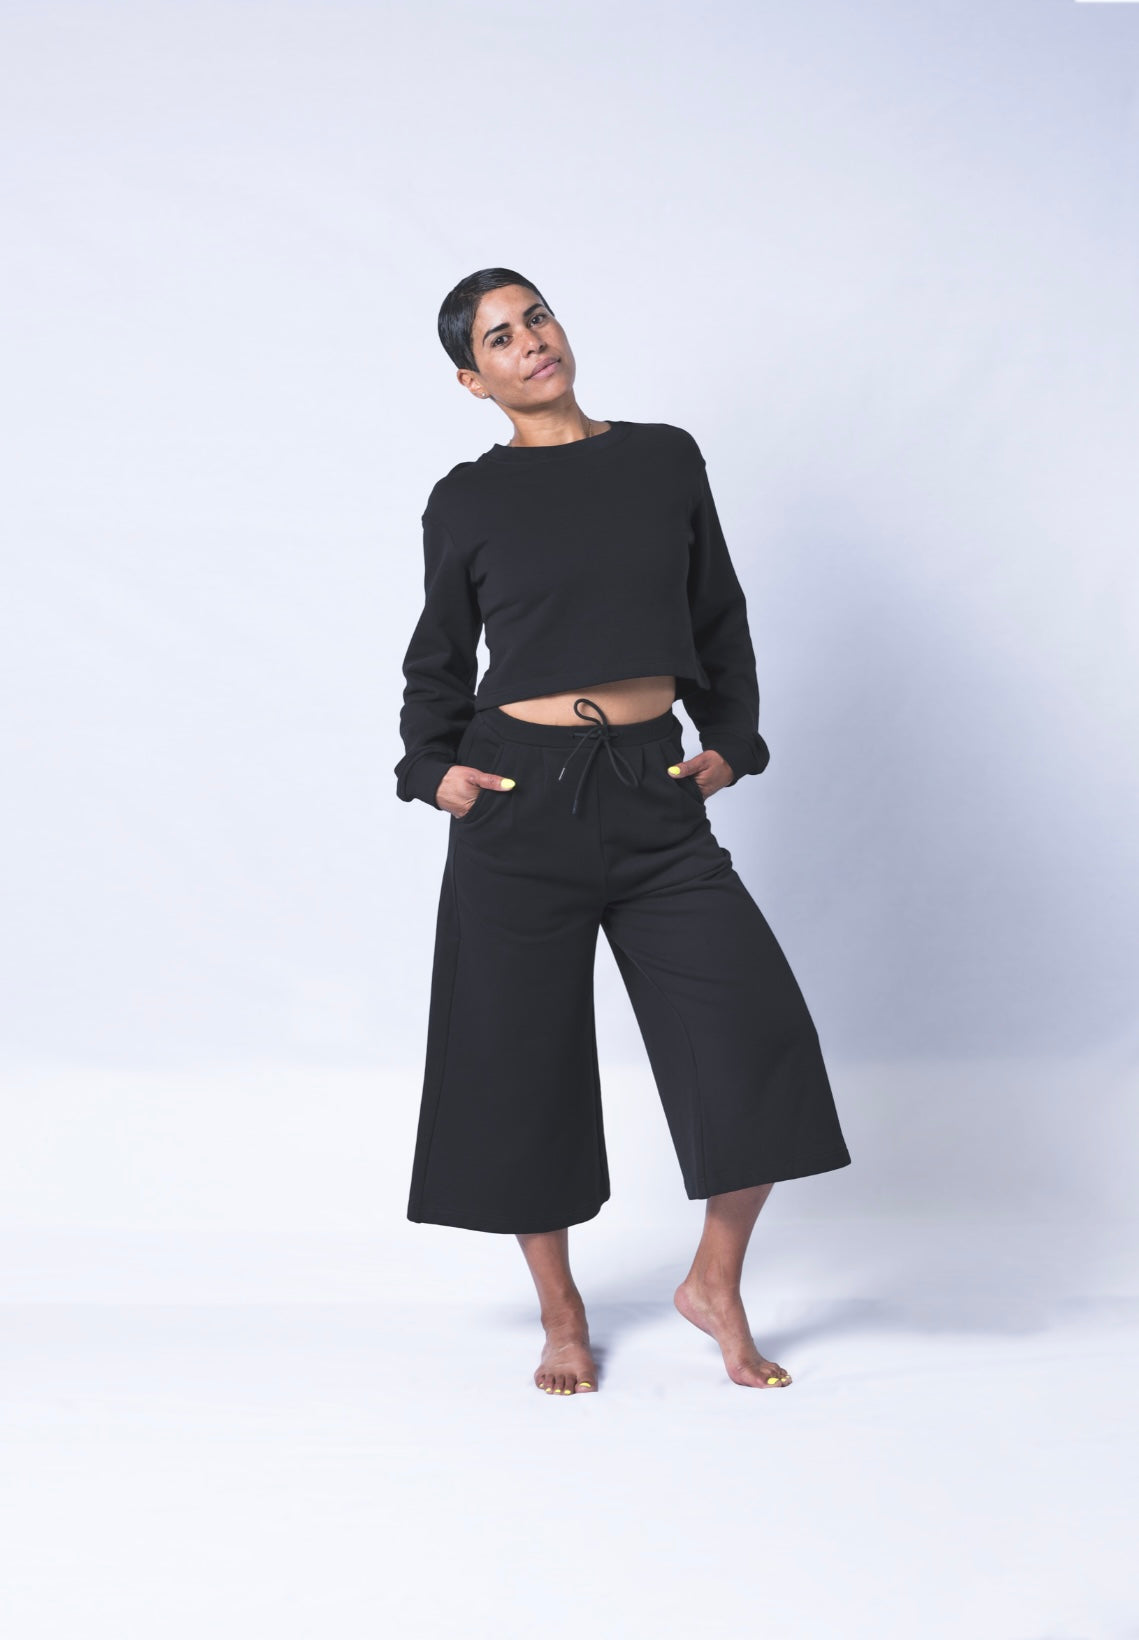 Wide Leg Palazzo Pants High Waisted Maxi Skirt Trousers, Plus Size -   Israel